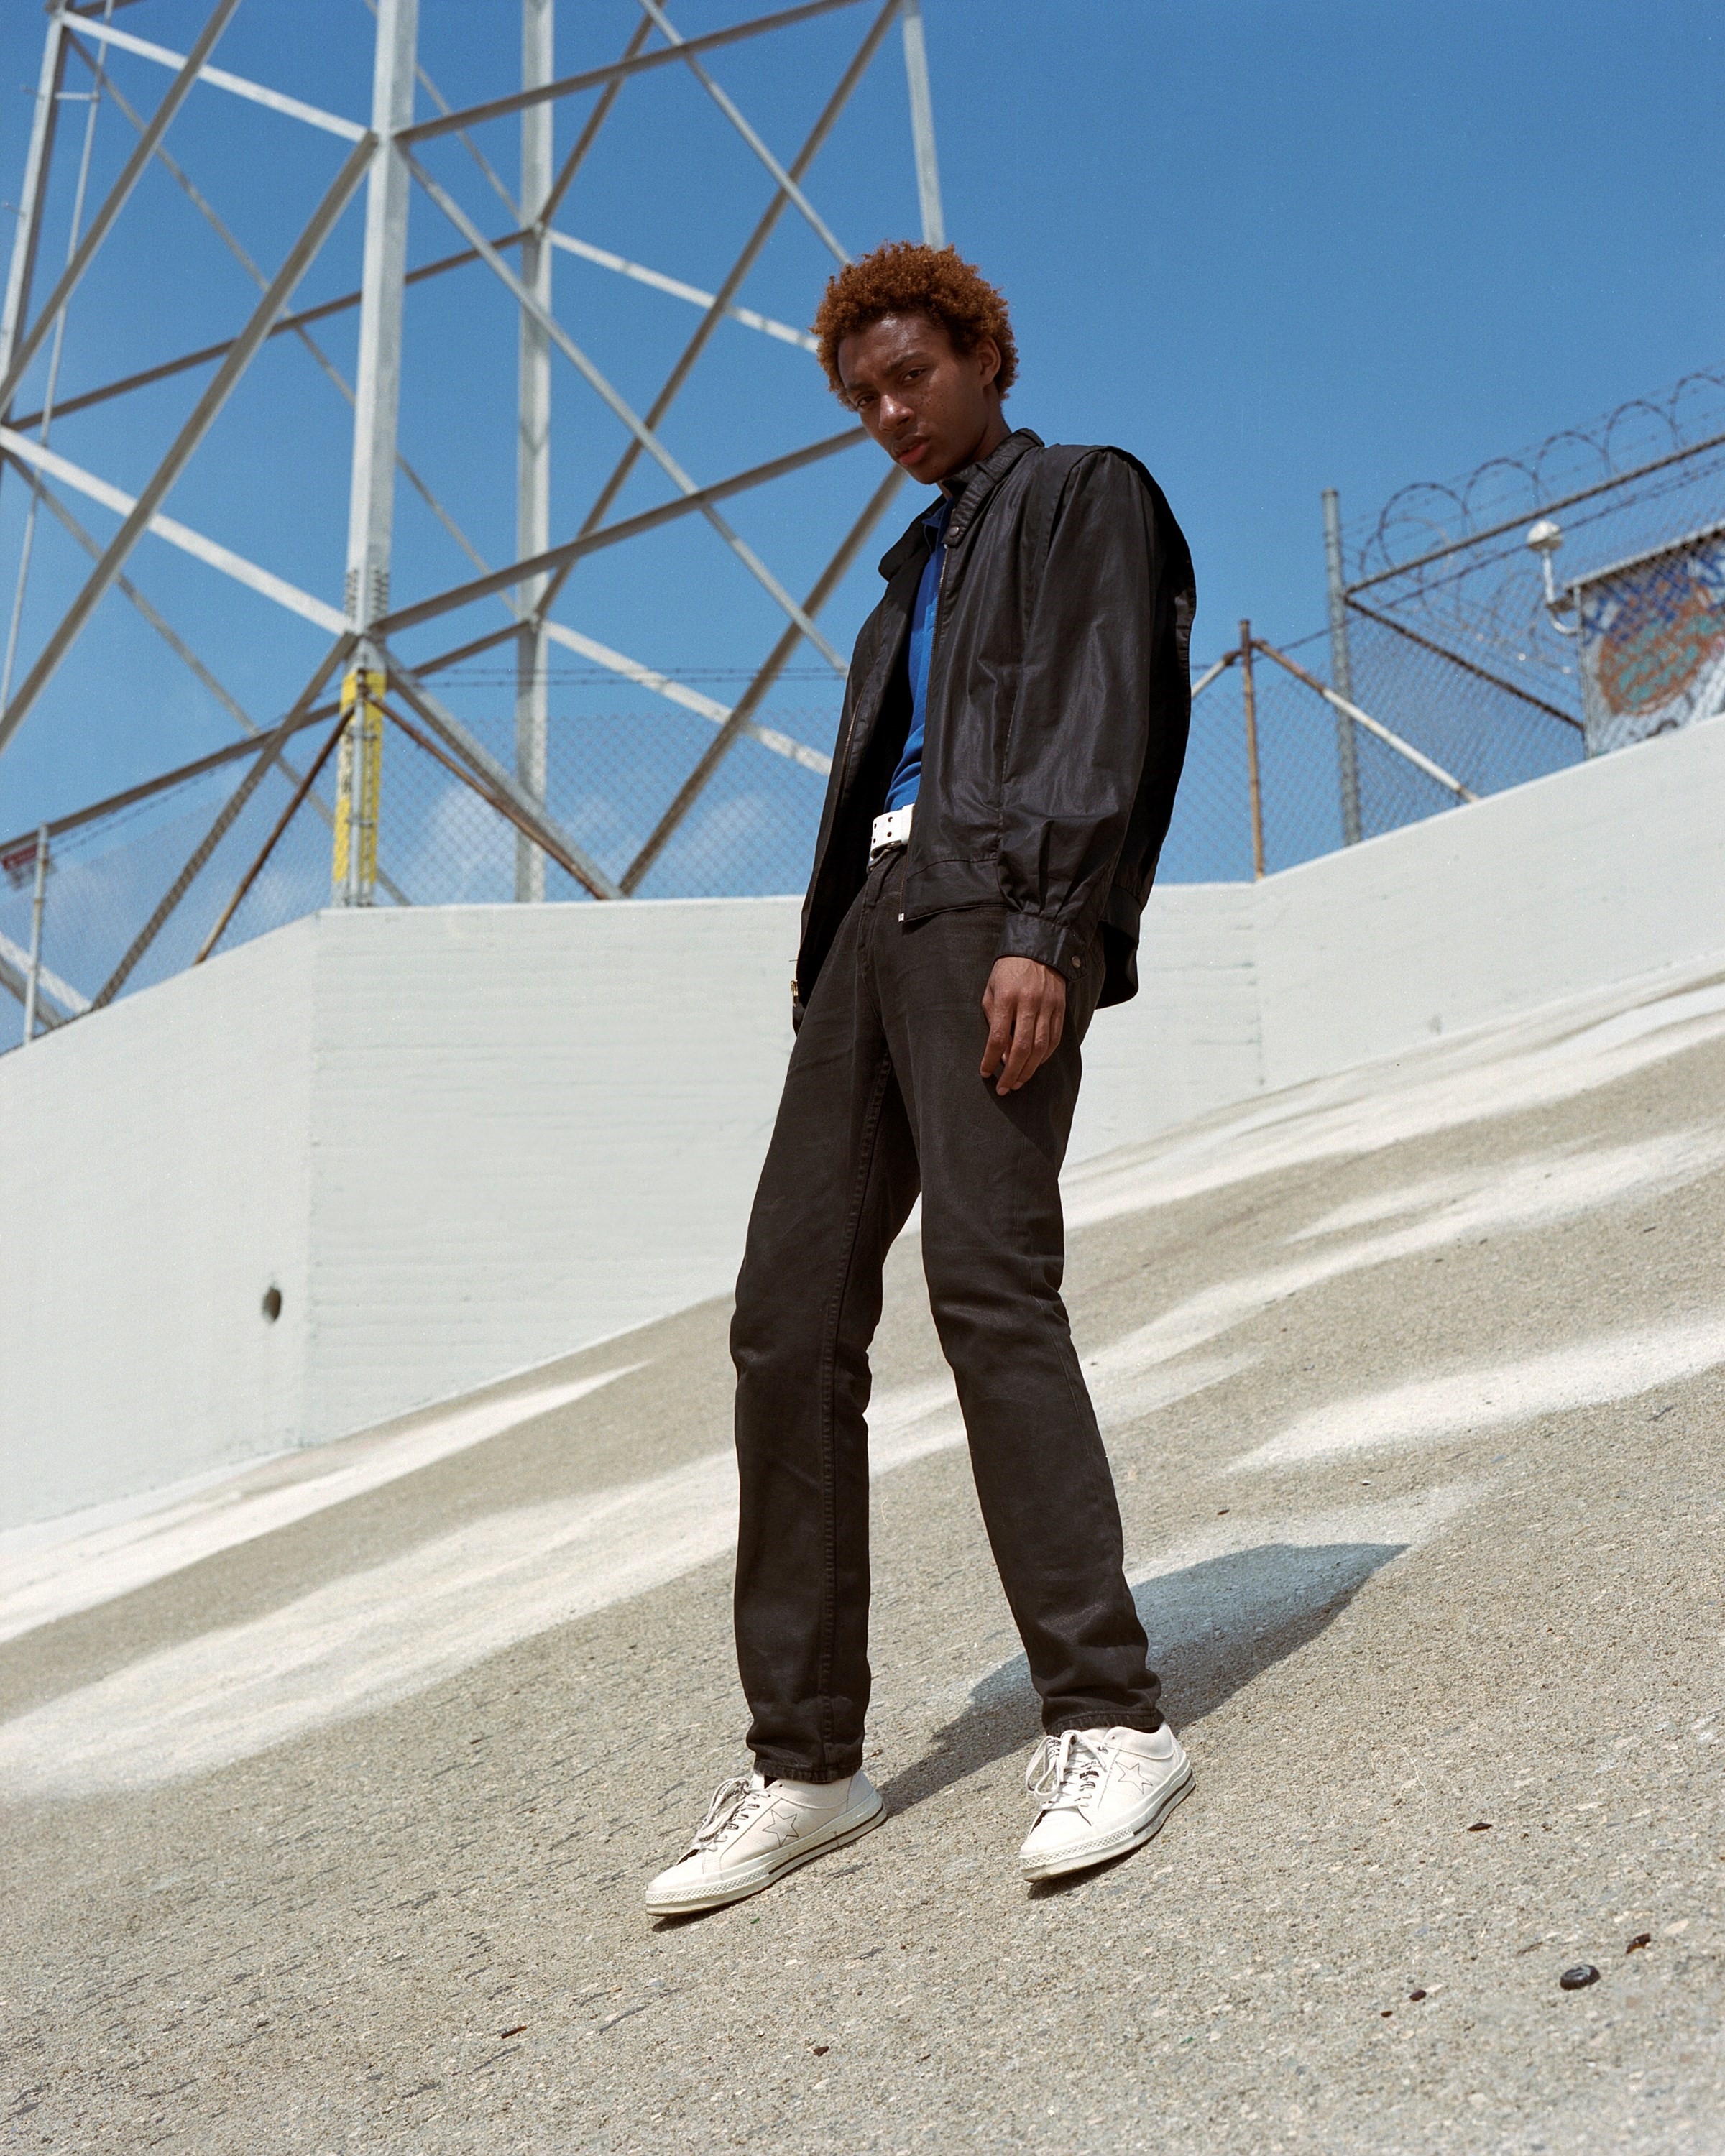 label Studios classic Converse styles inside-out | Dazed